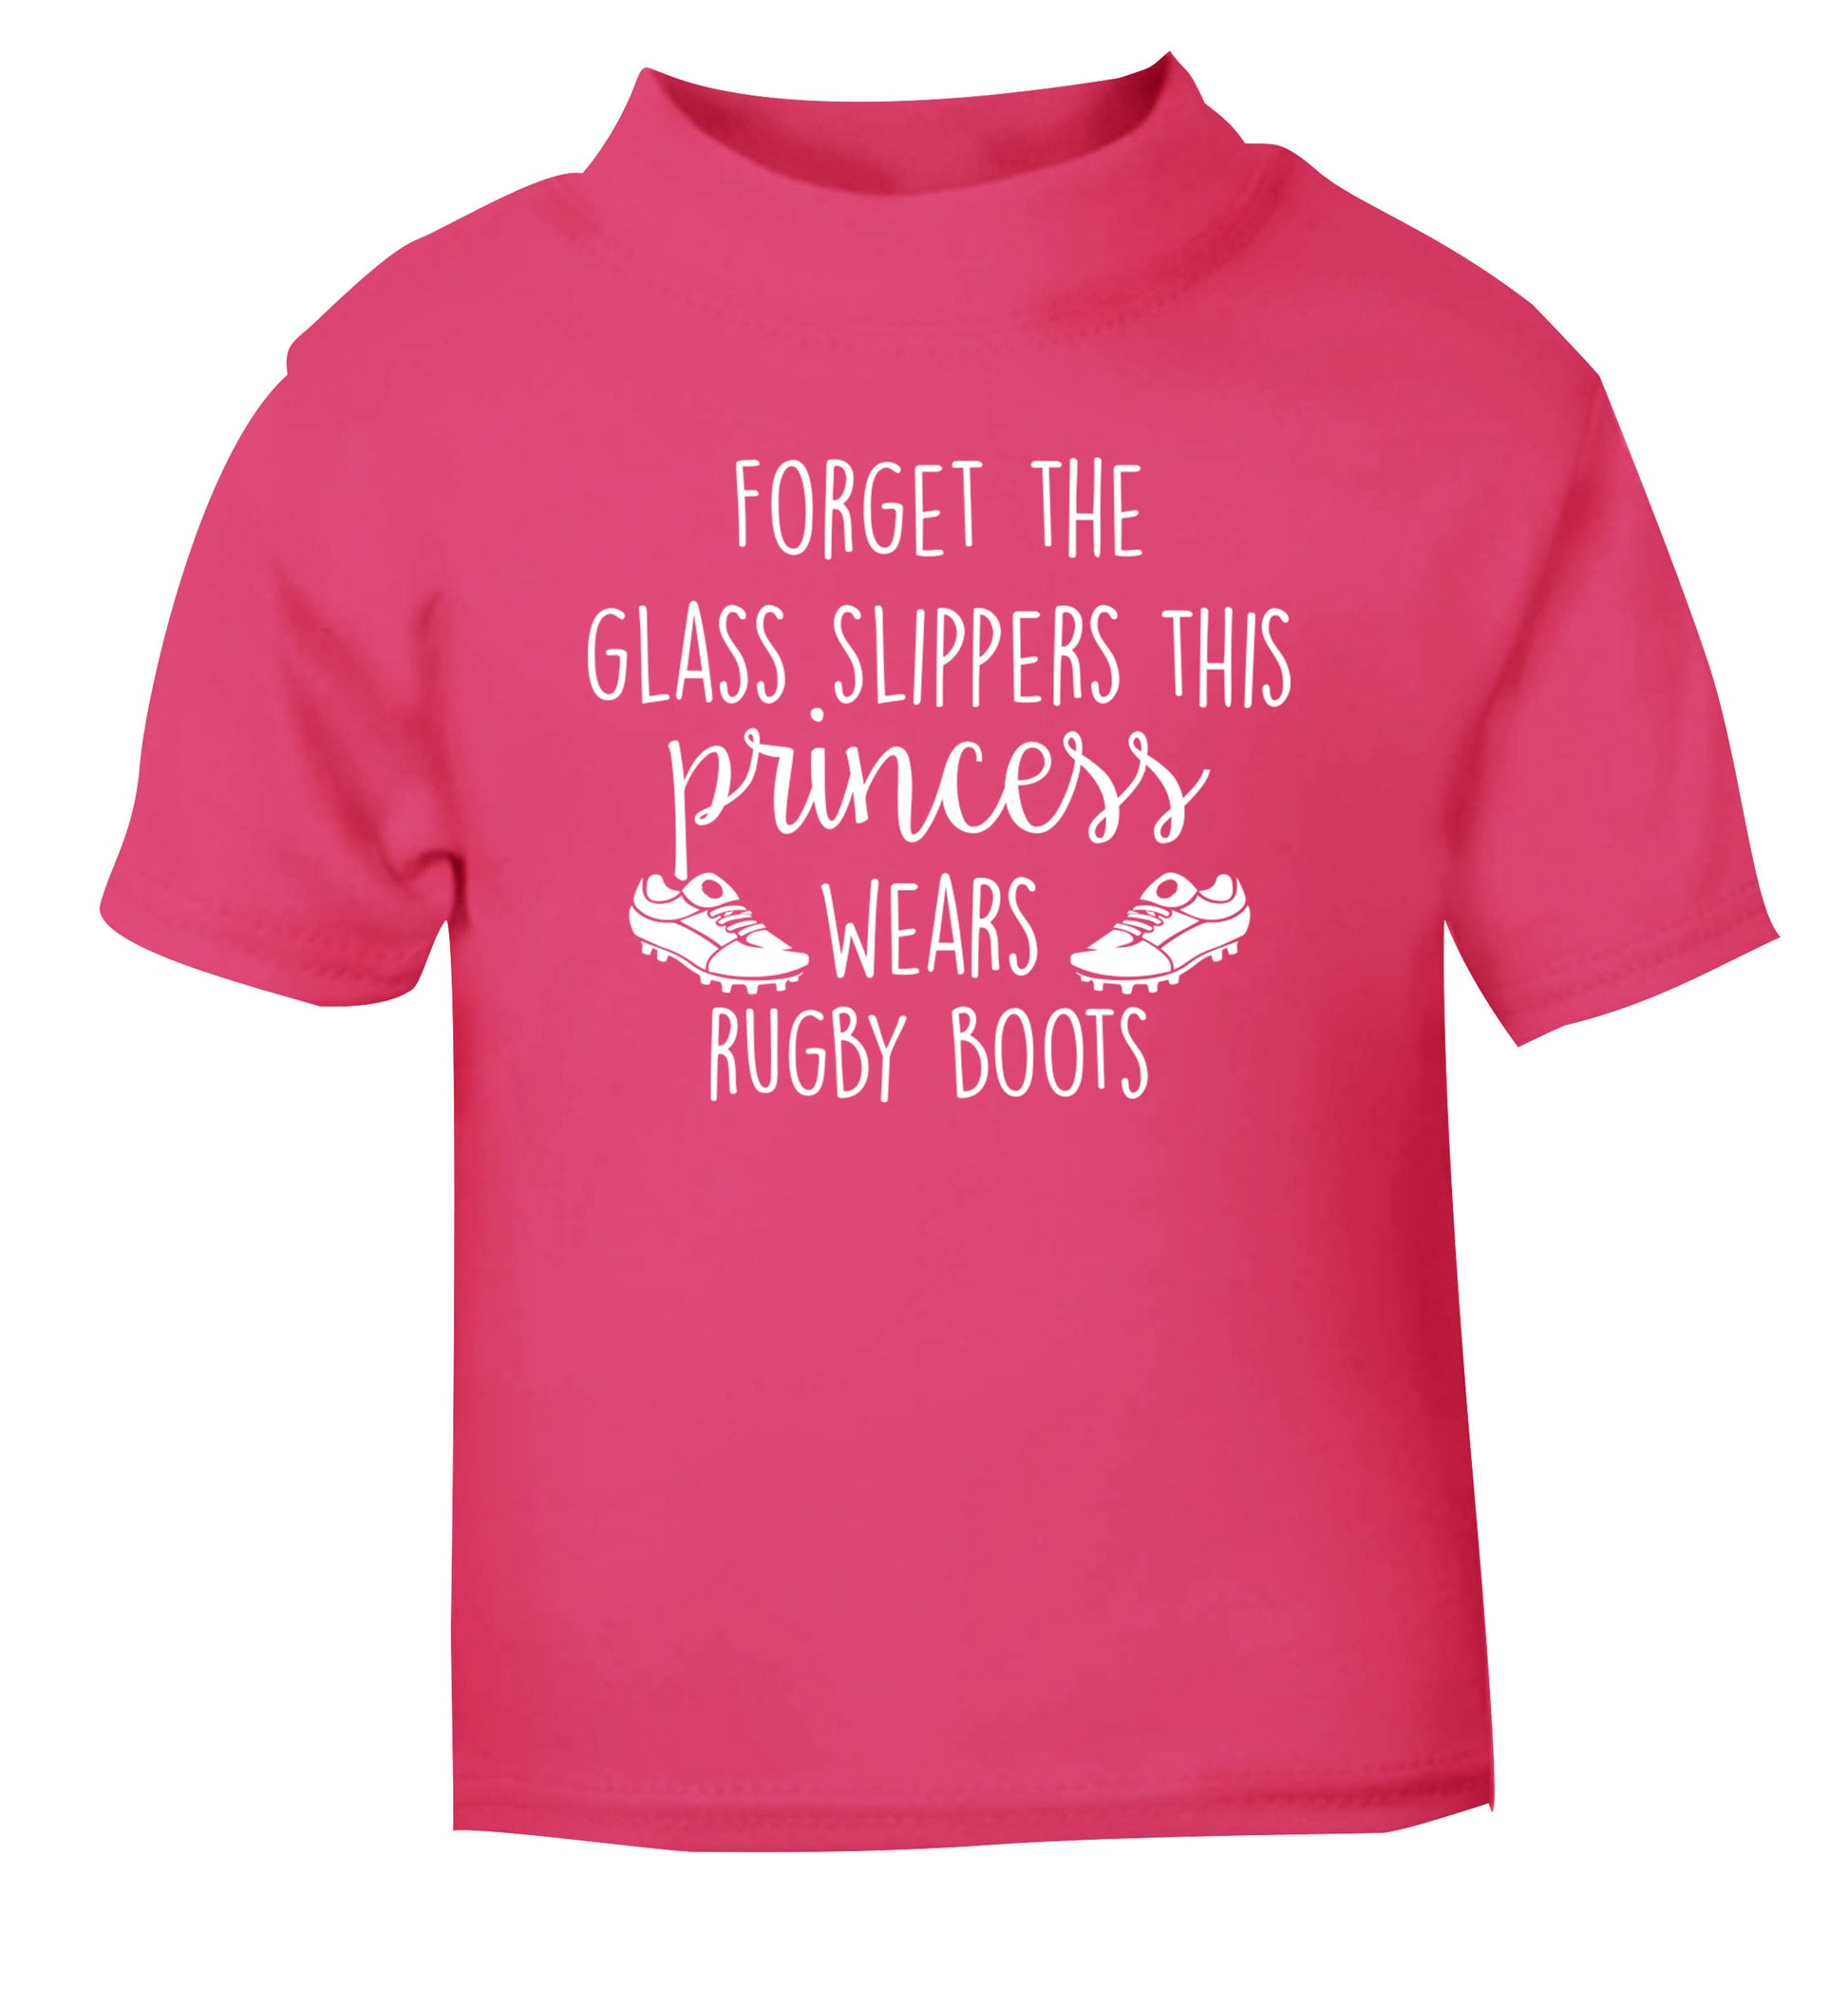 Forget the glass slippers this princess wears rugby boots pink Baby Toddler Tshirt 2 Years